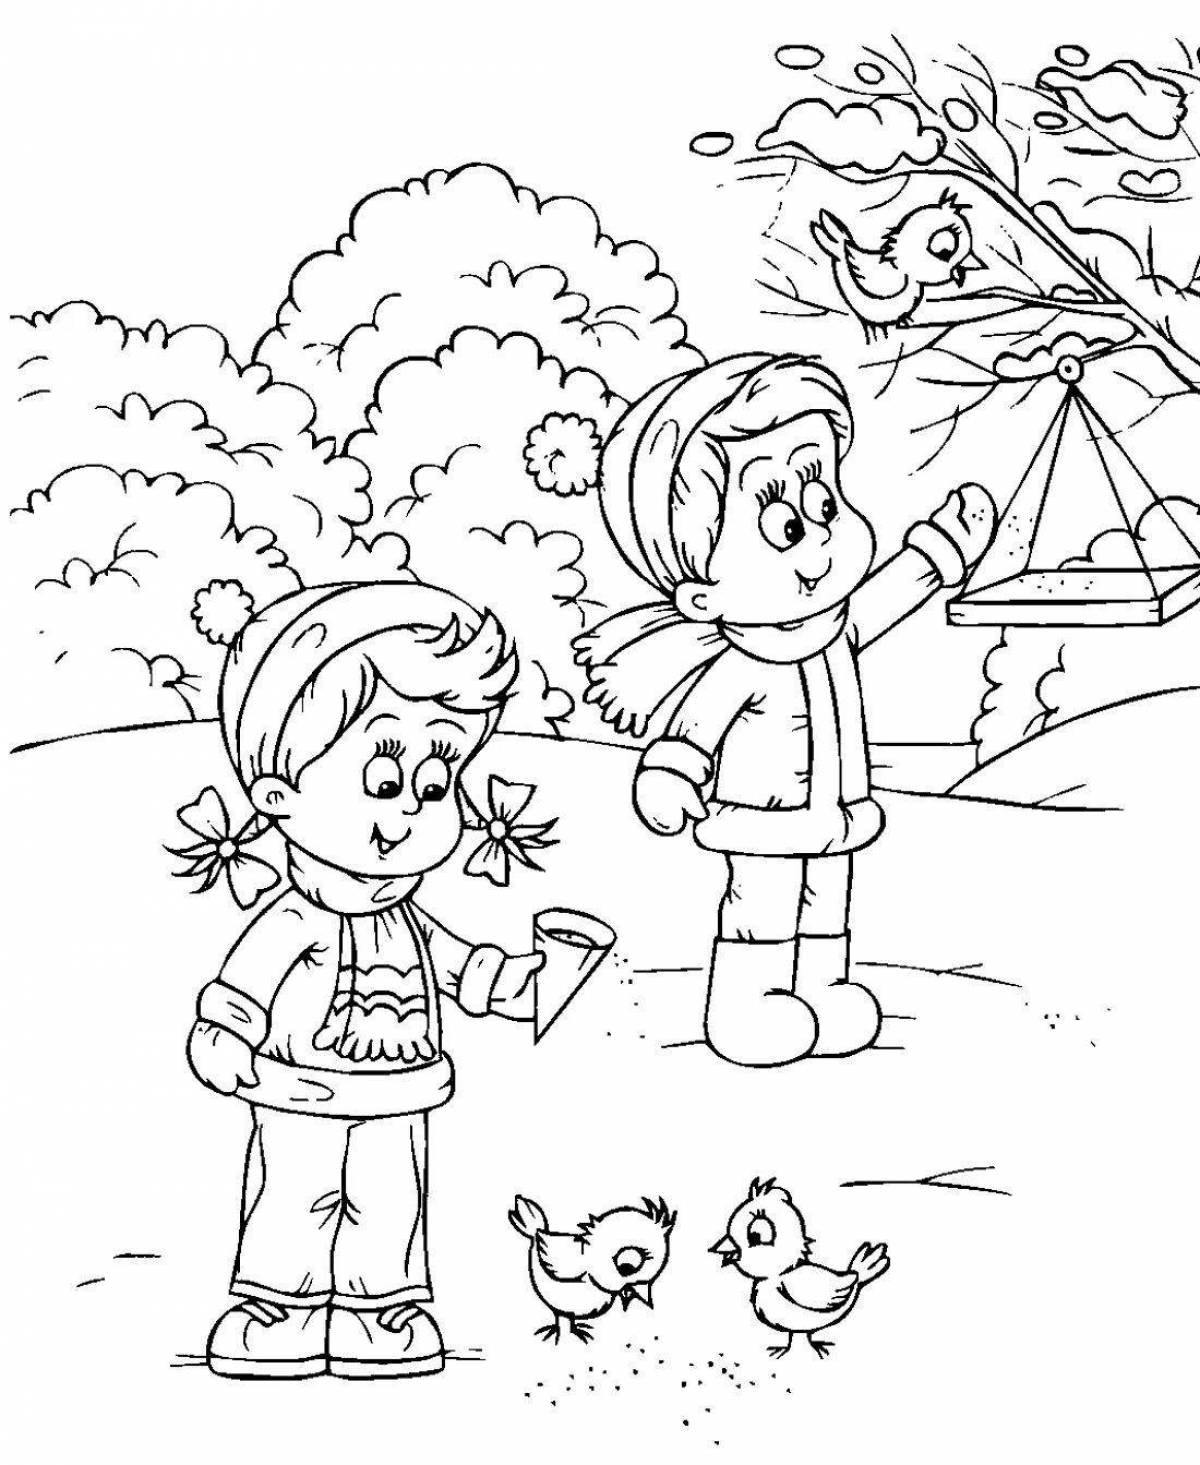 Exquisite bird feeding in winter coloring page